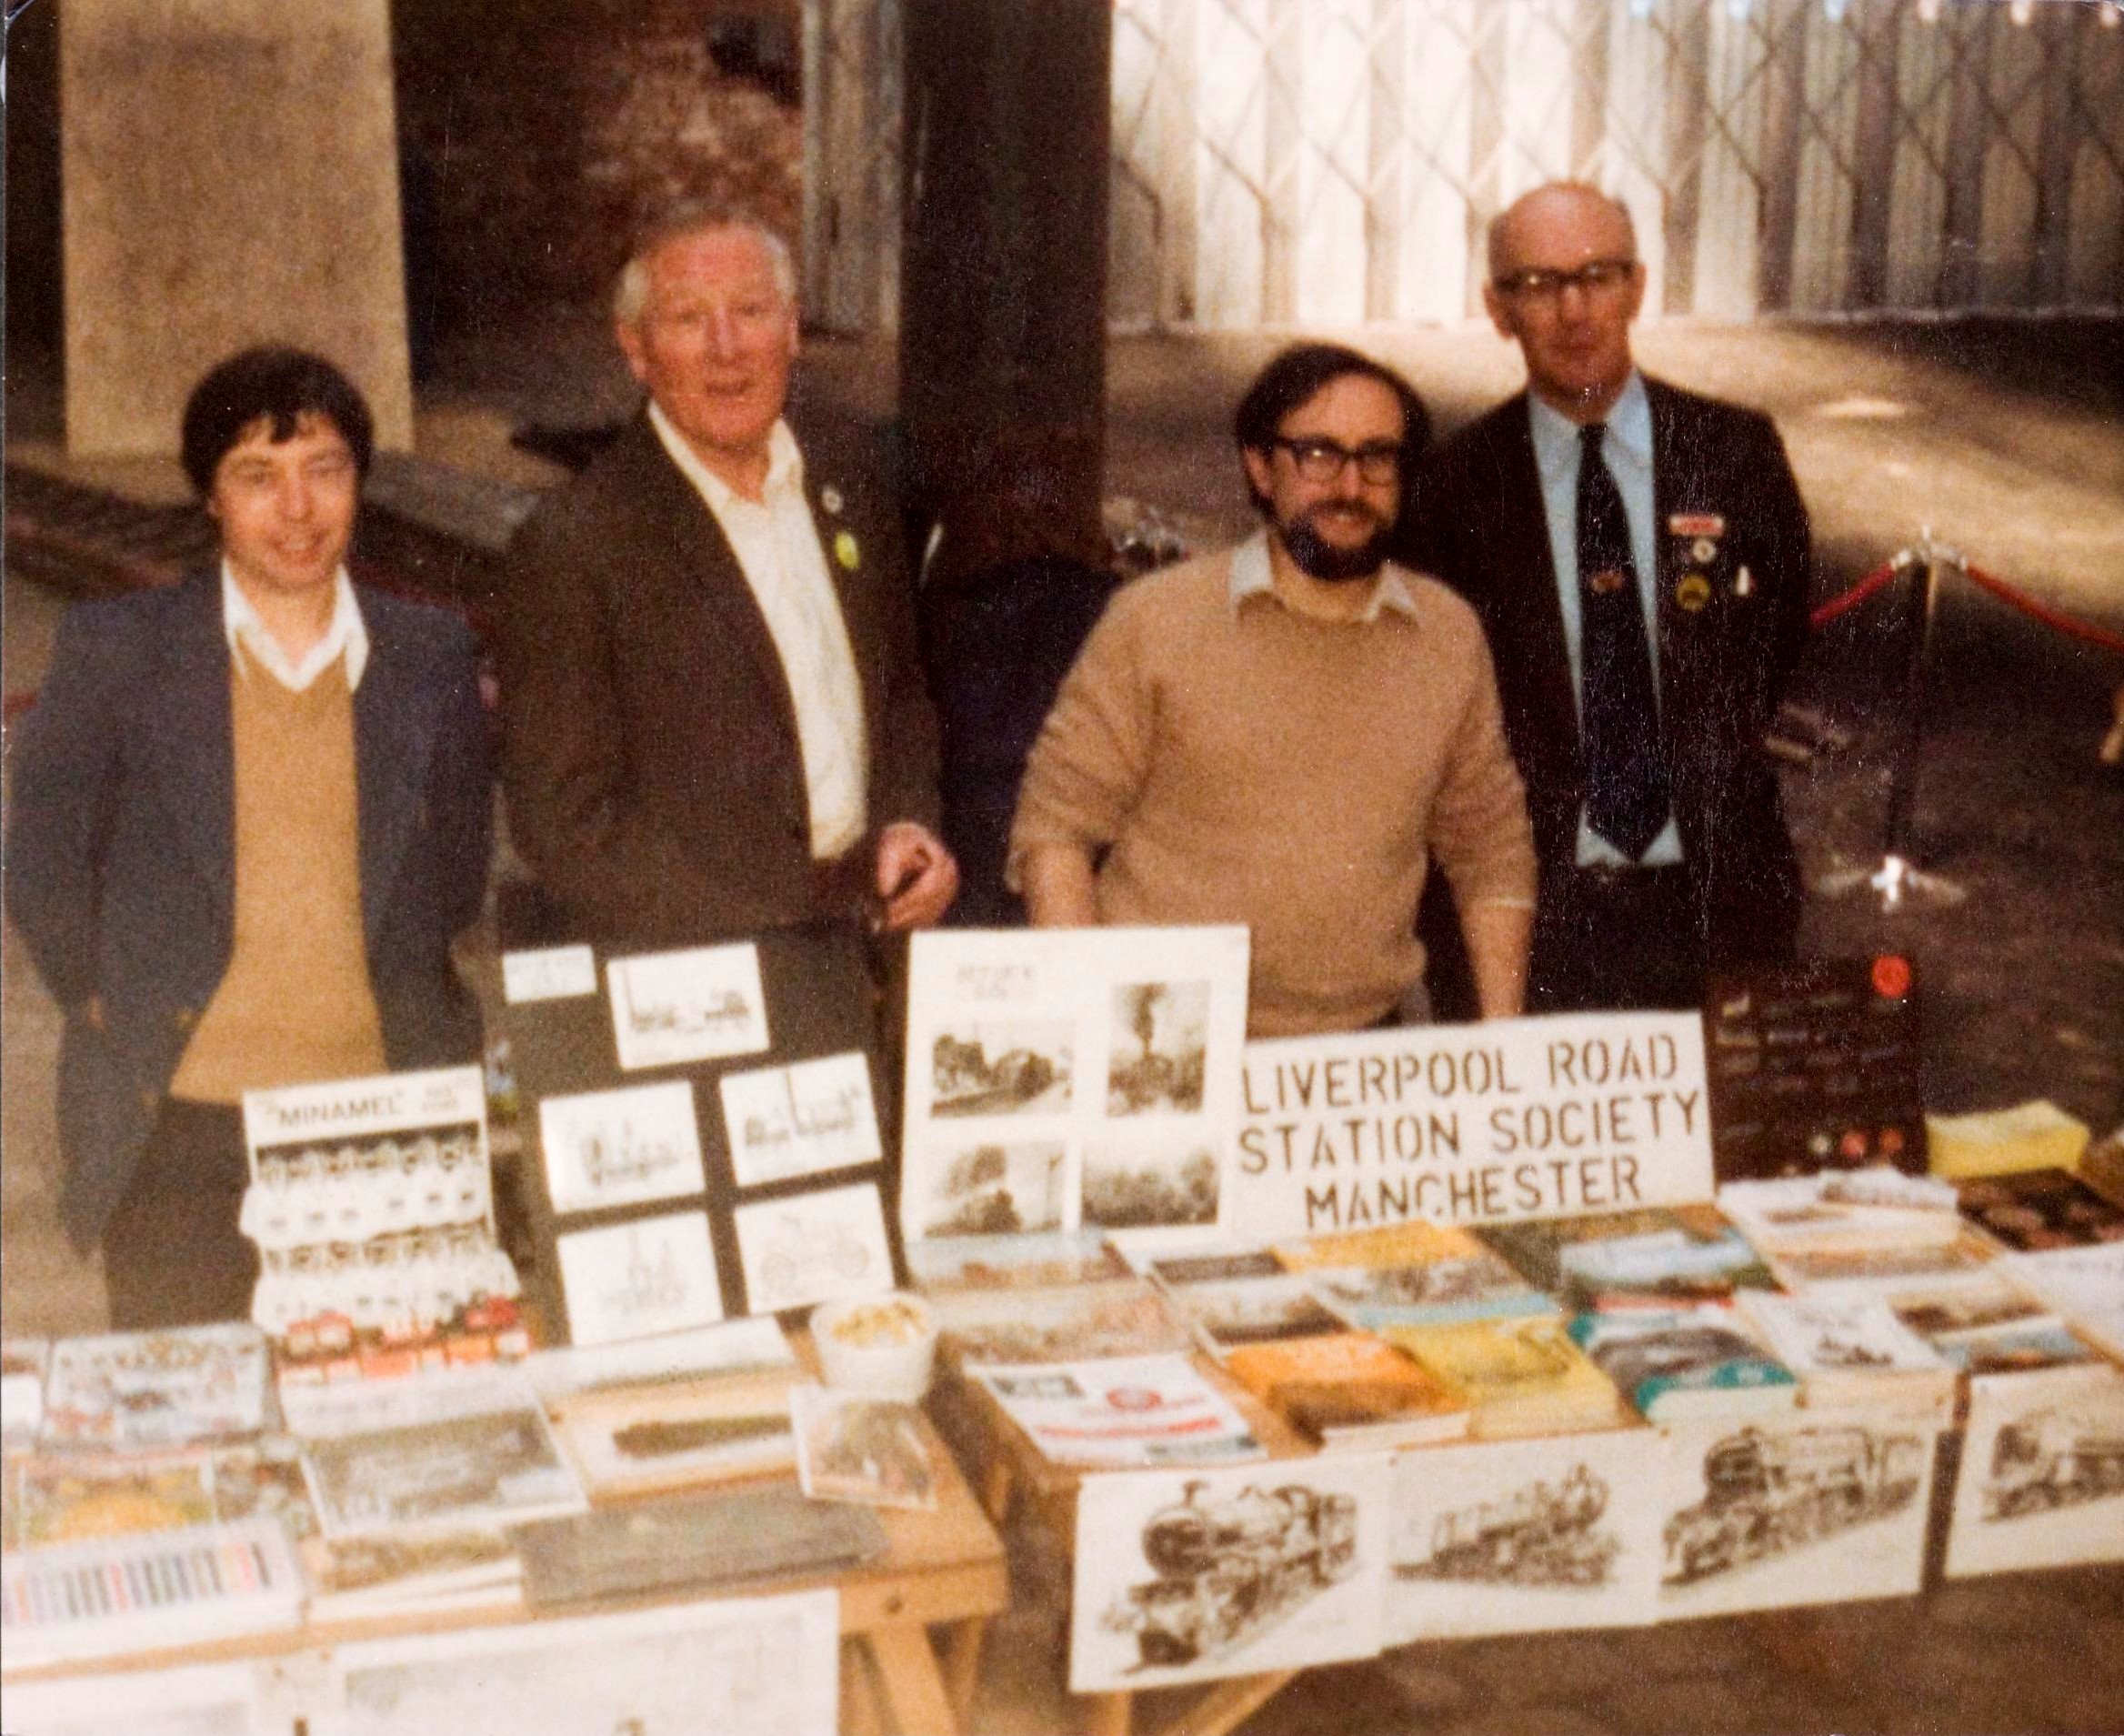 Members of the Liverpool Road Station Society raise funds at the Great Railway Exposition, 1980. Liverpool Road Station Society.